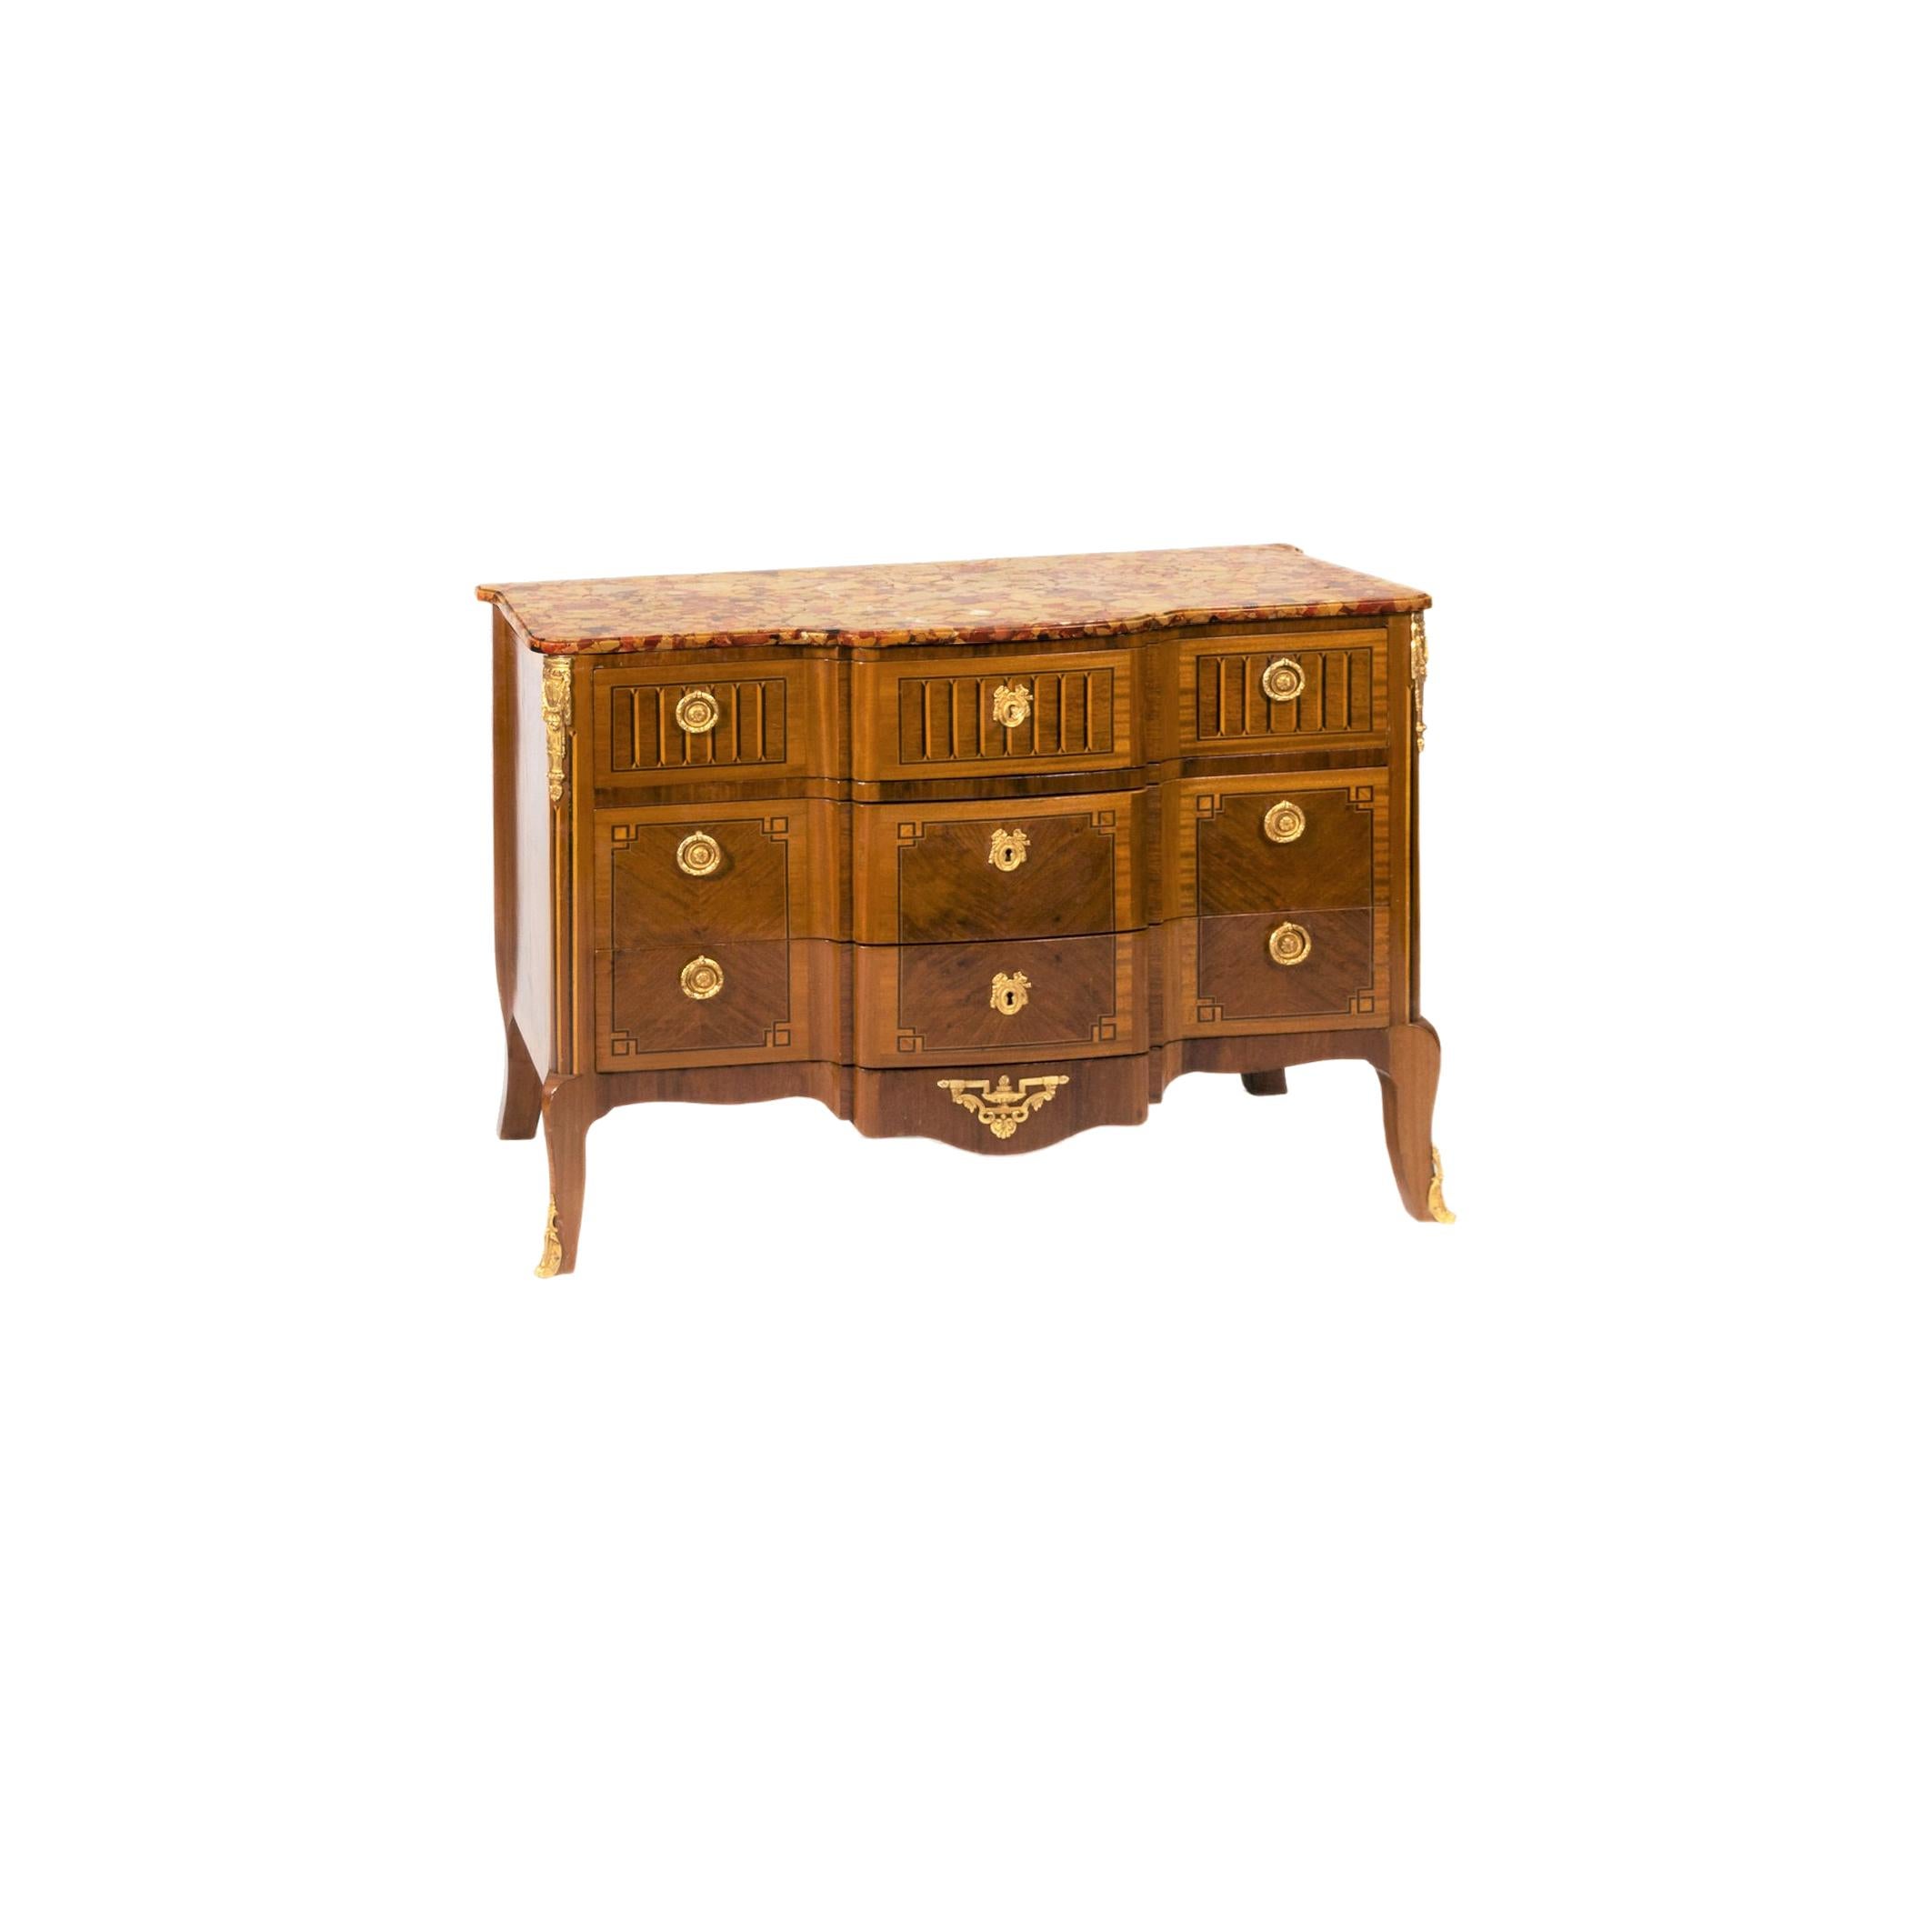 A marble top of breakfront shape with molded edge, three long shaped drawers of tulipwood veneer panels with ebony stringing, top drawer inlaid with ebony and sycamore design. 
Gilt brass laurel wreath handles, gilt brass escutcheons with central